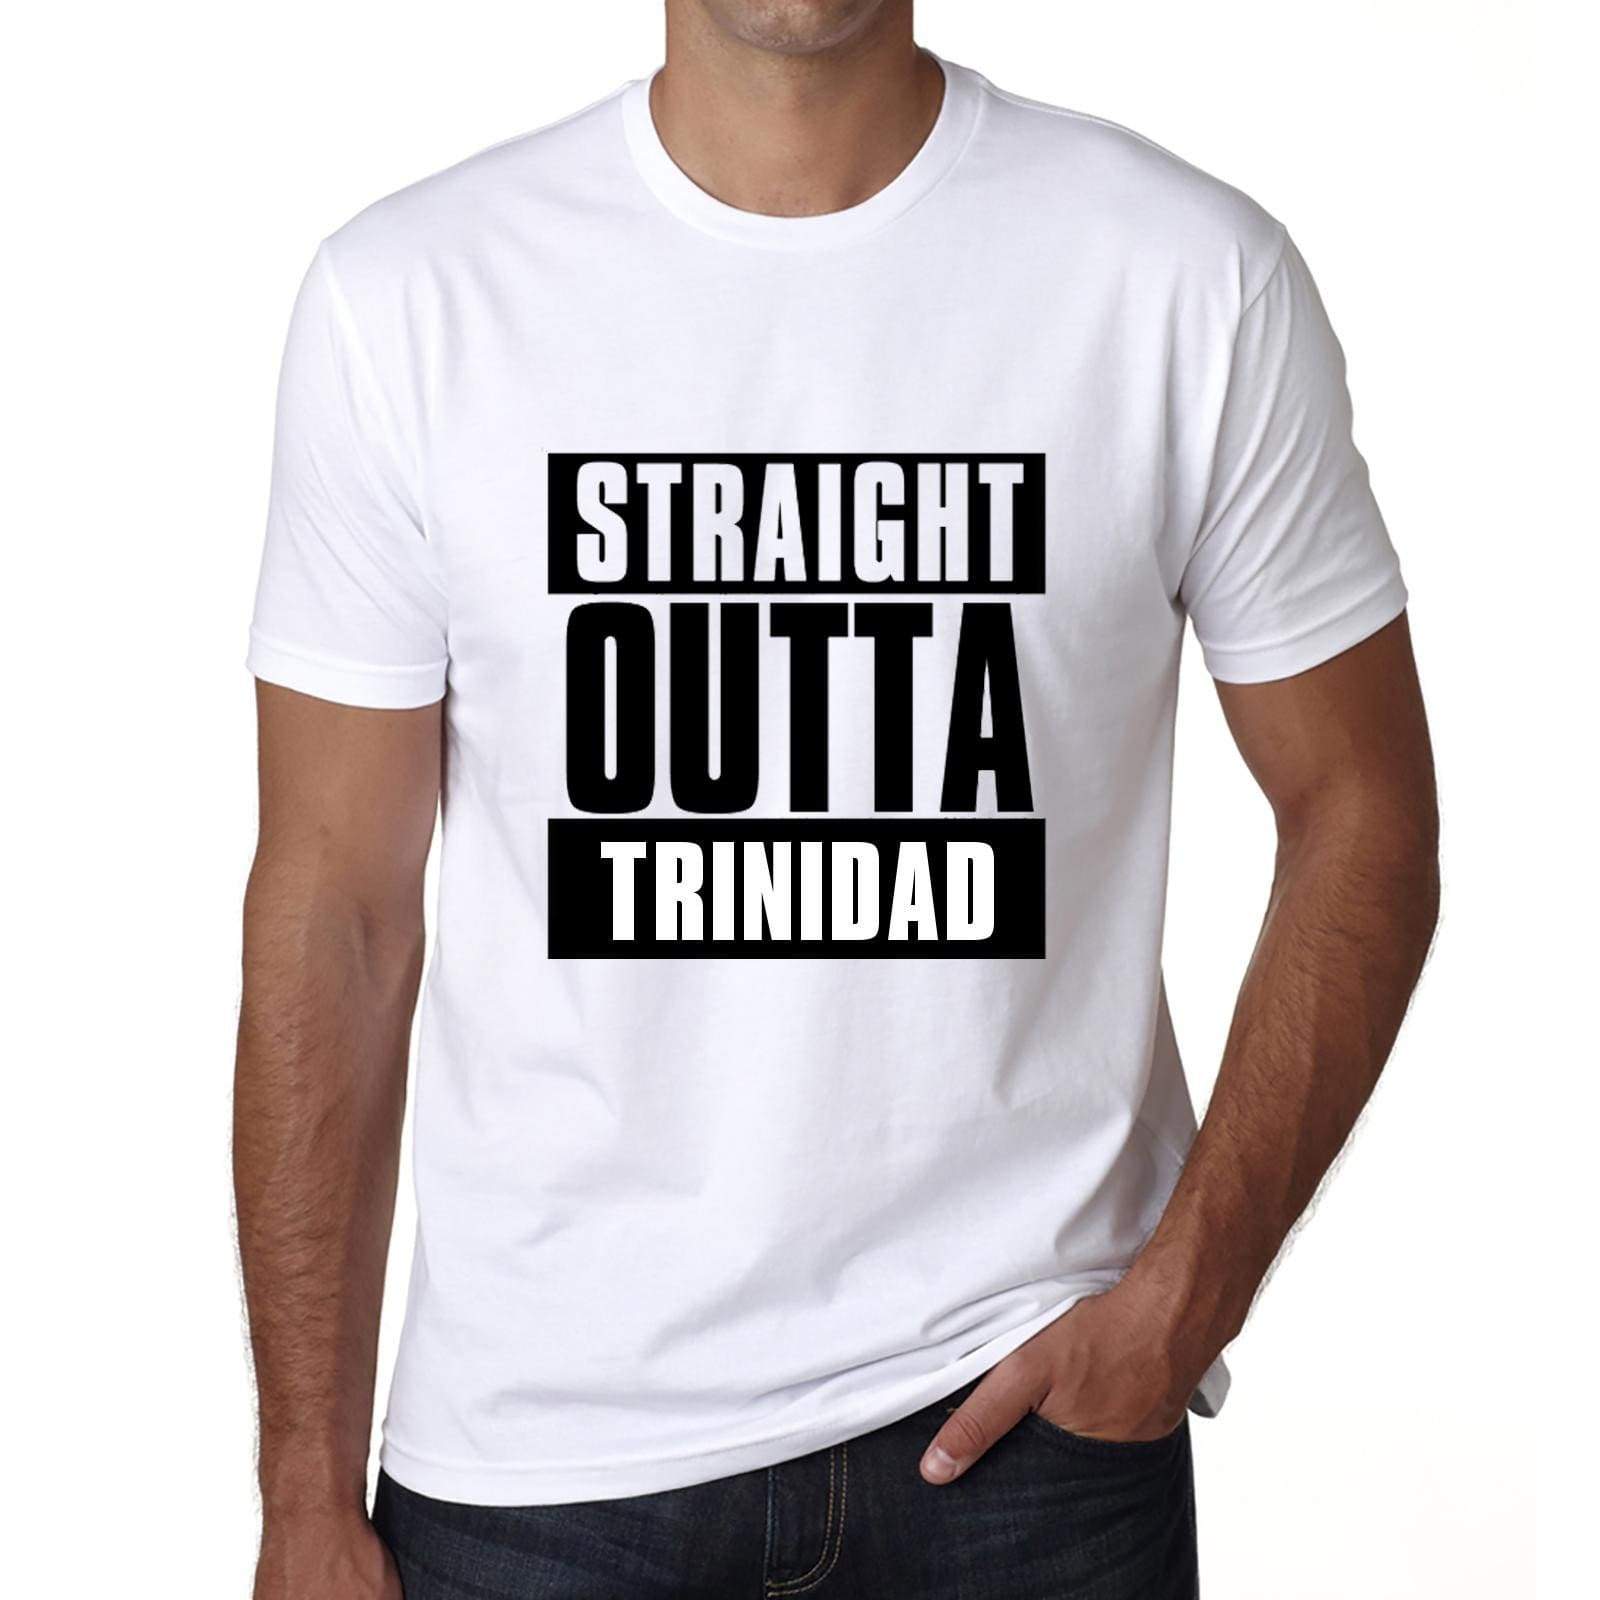 Straight Outta Trinidad Mens Short Sleeve Round Neck T-Shirt 00027 - White / S - Casual